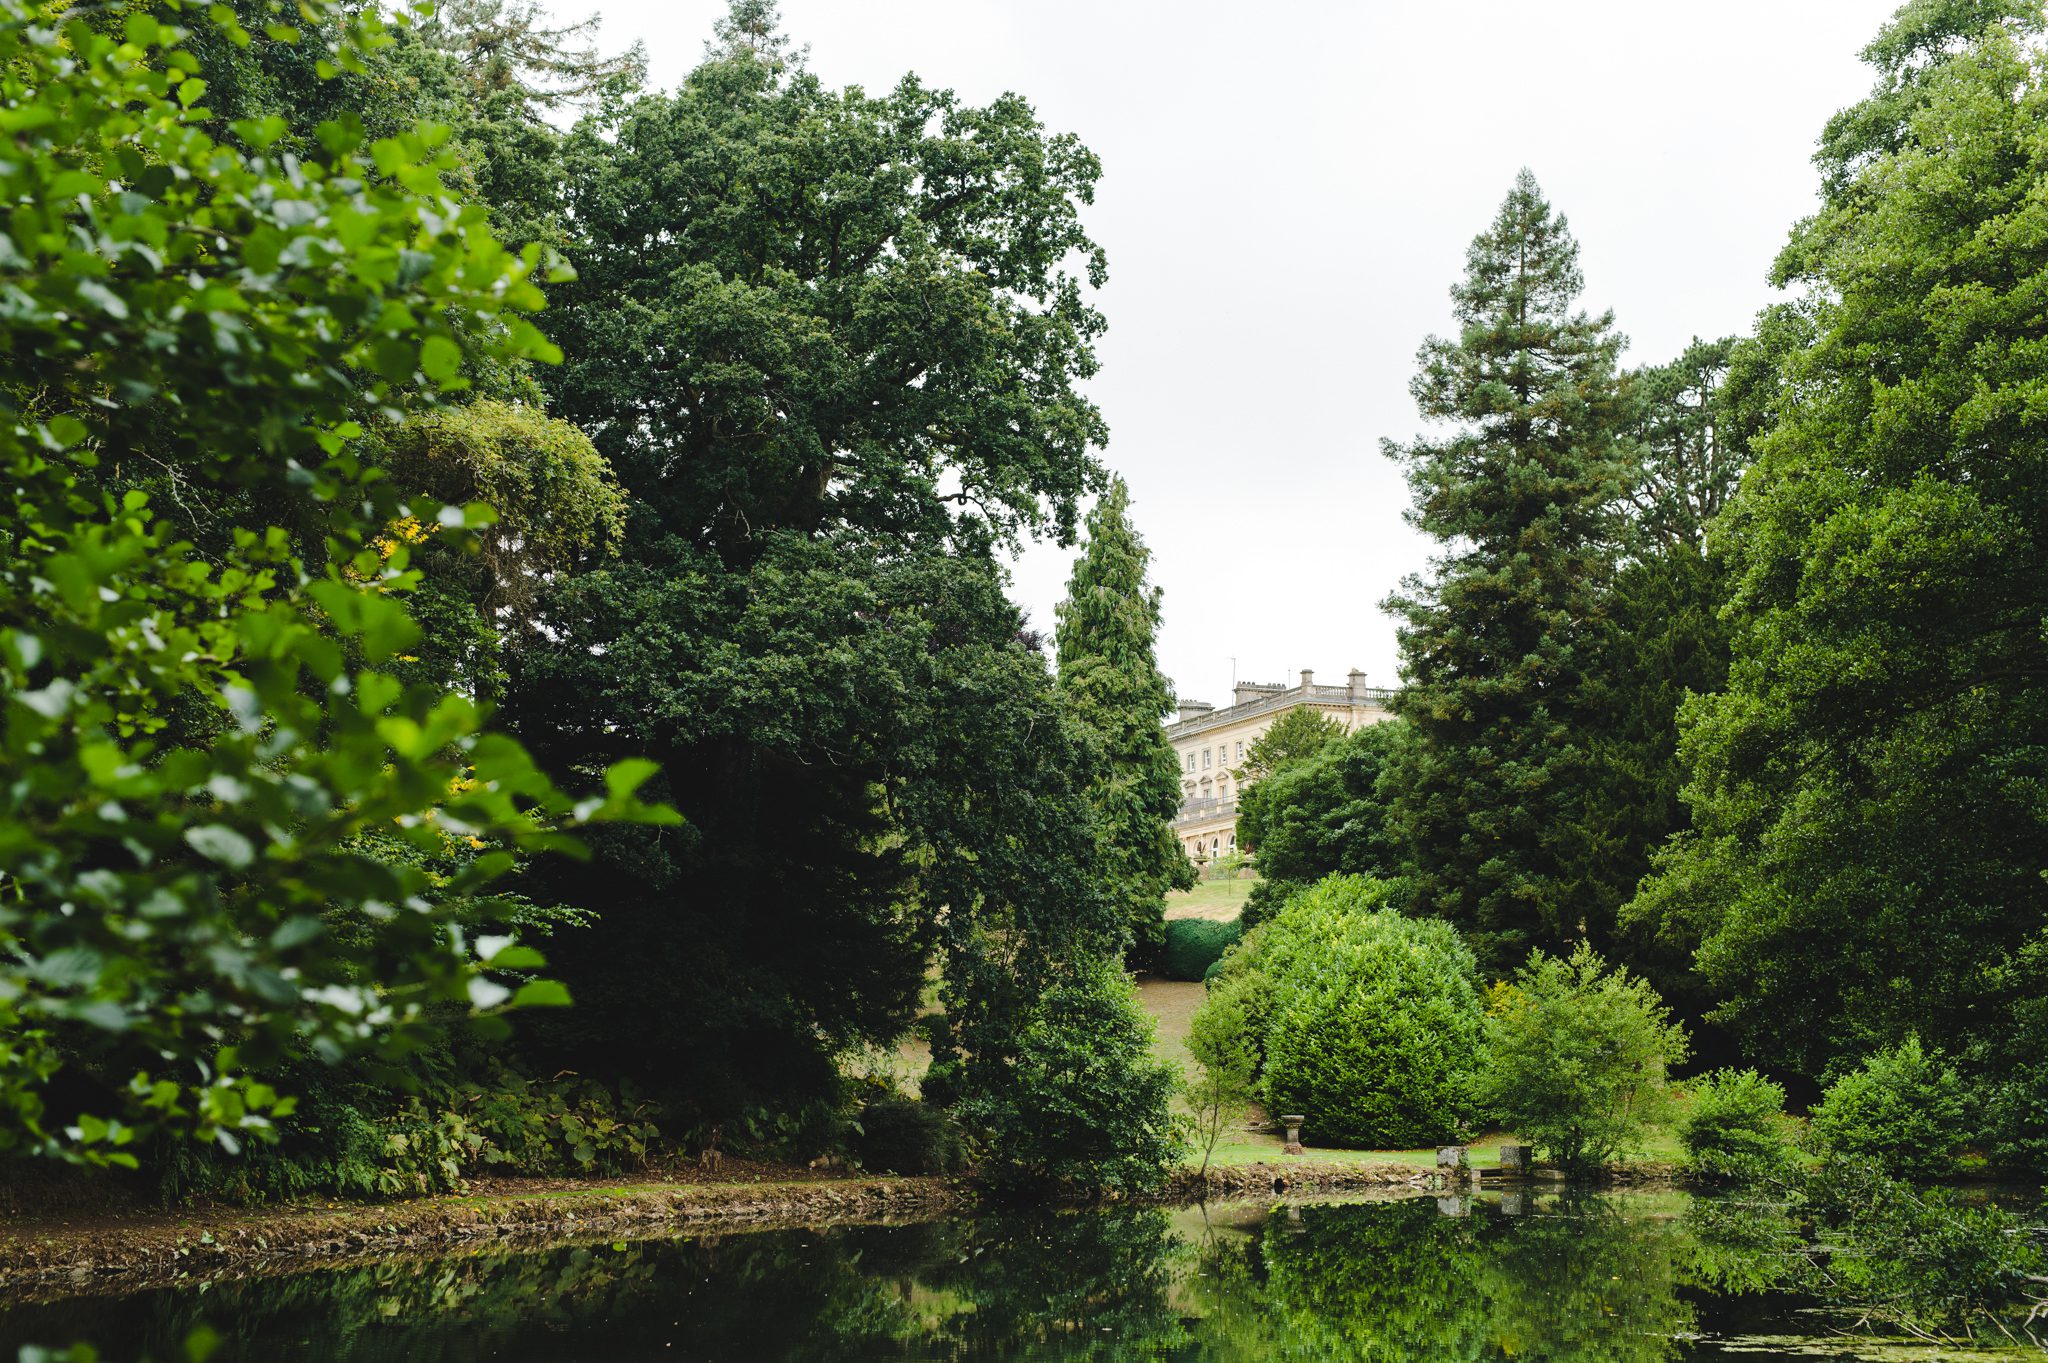 A view of Cowley Manor in The Cotswolds